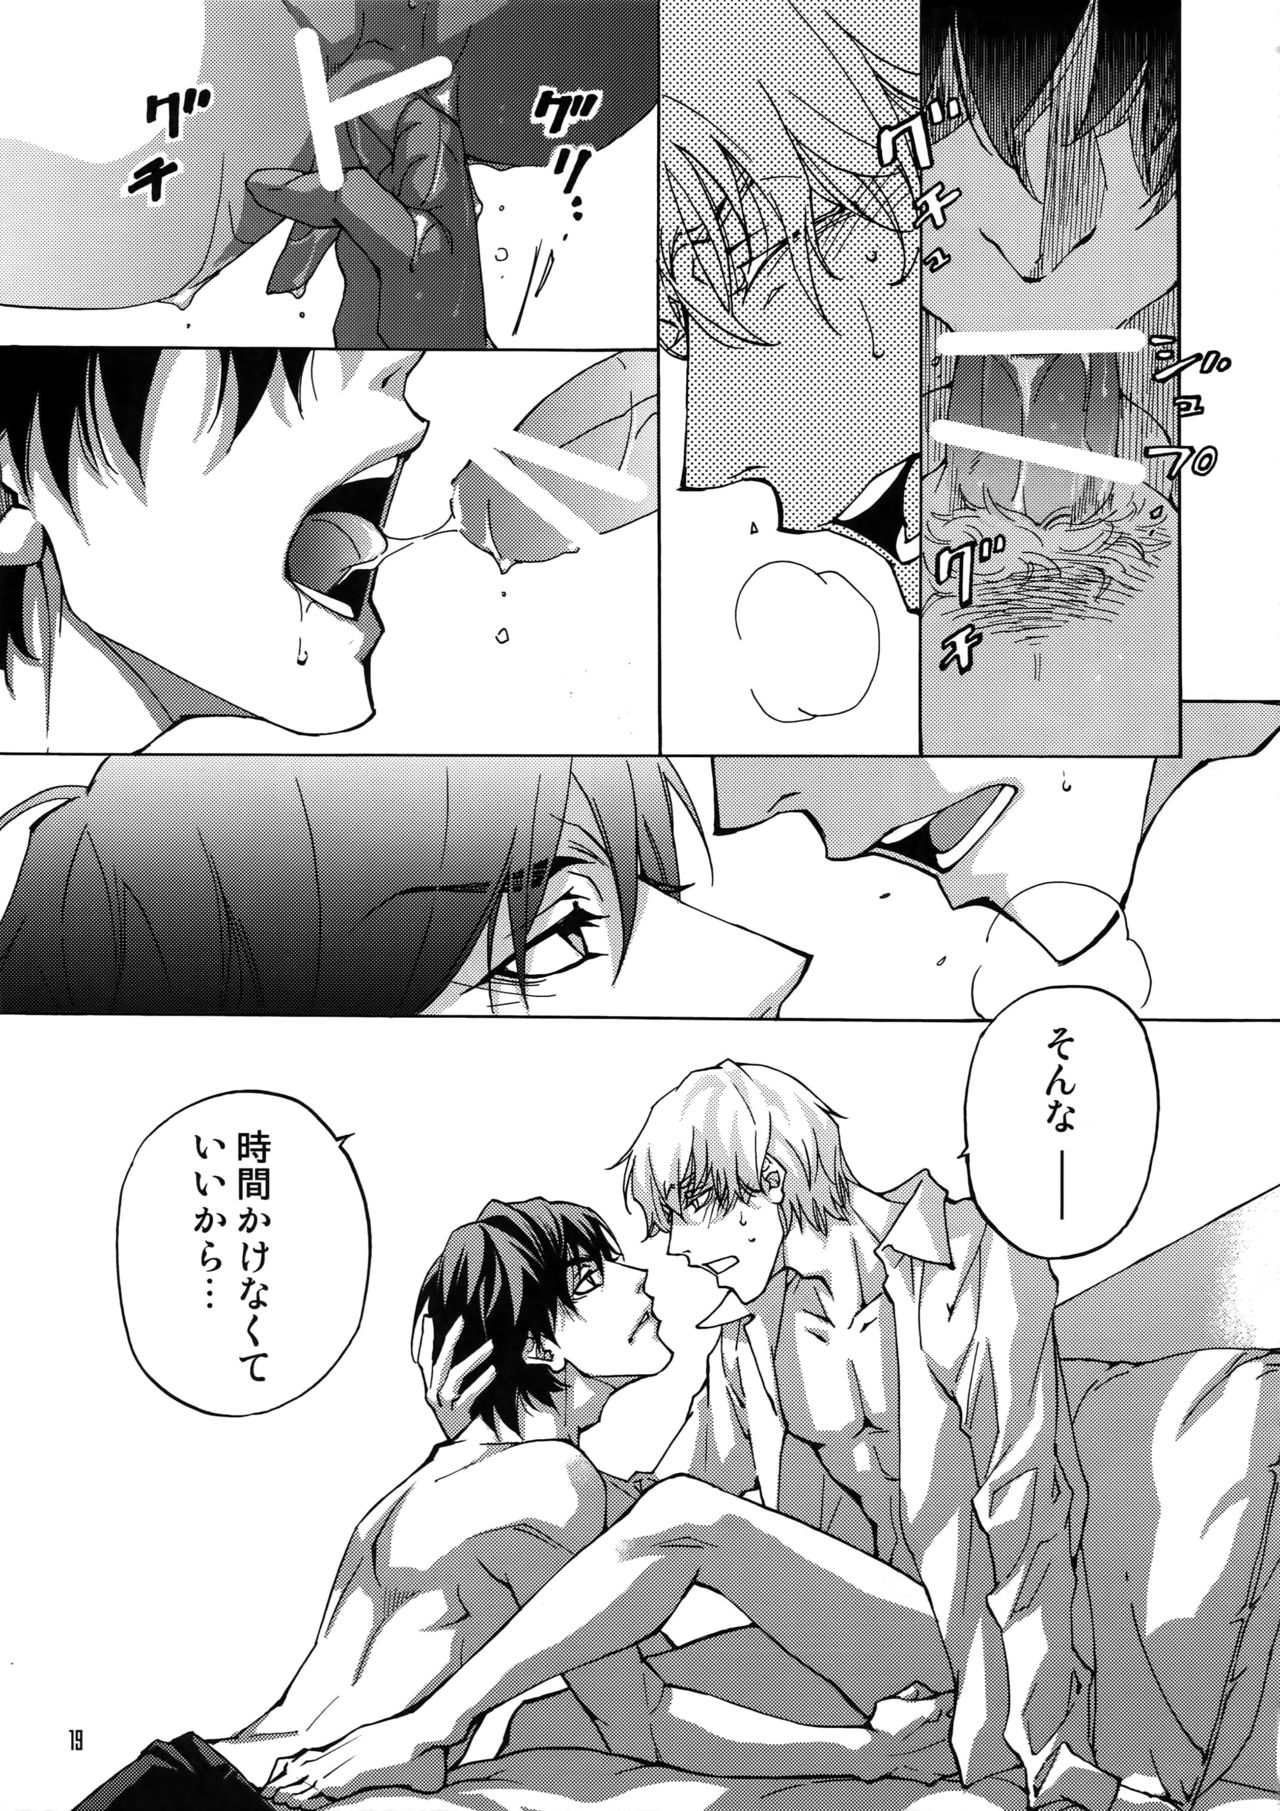 [East End Club (Matoh Sanami)] BACK STAGE PASS 10 page 16 full